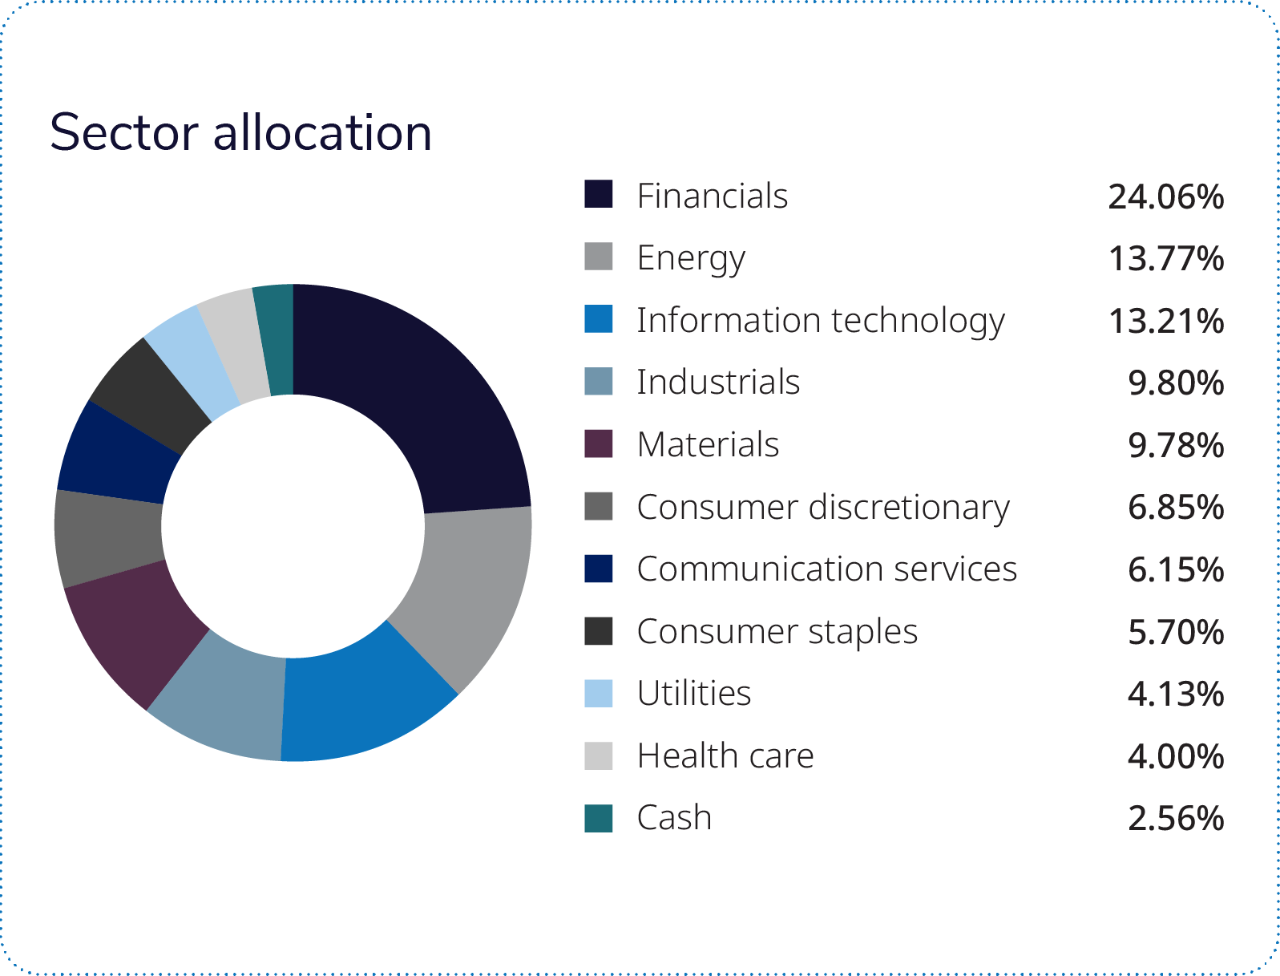 Almost two-thirds of the fund is comprised of four sectors: financials, energy, information technology and industrials. 